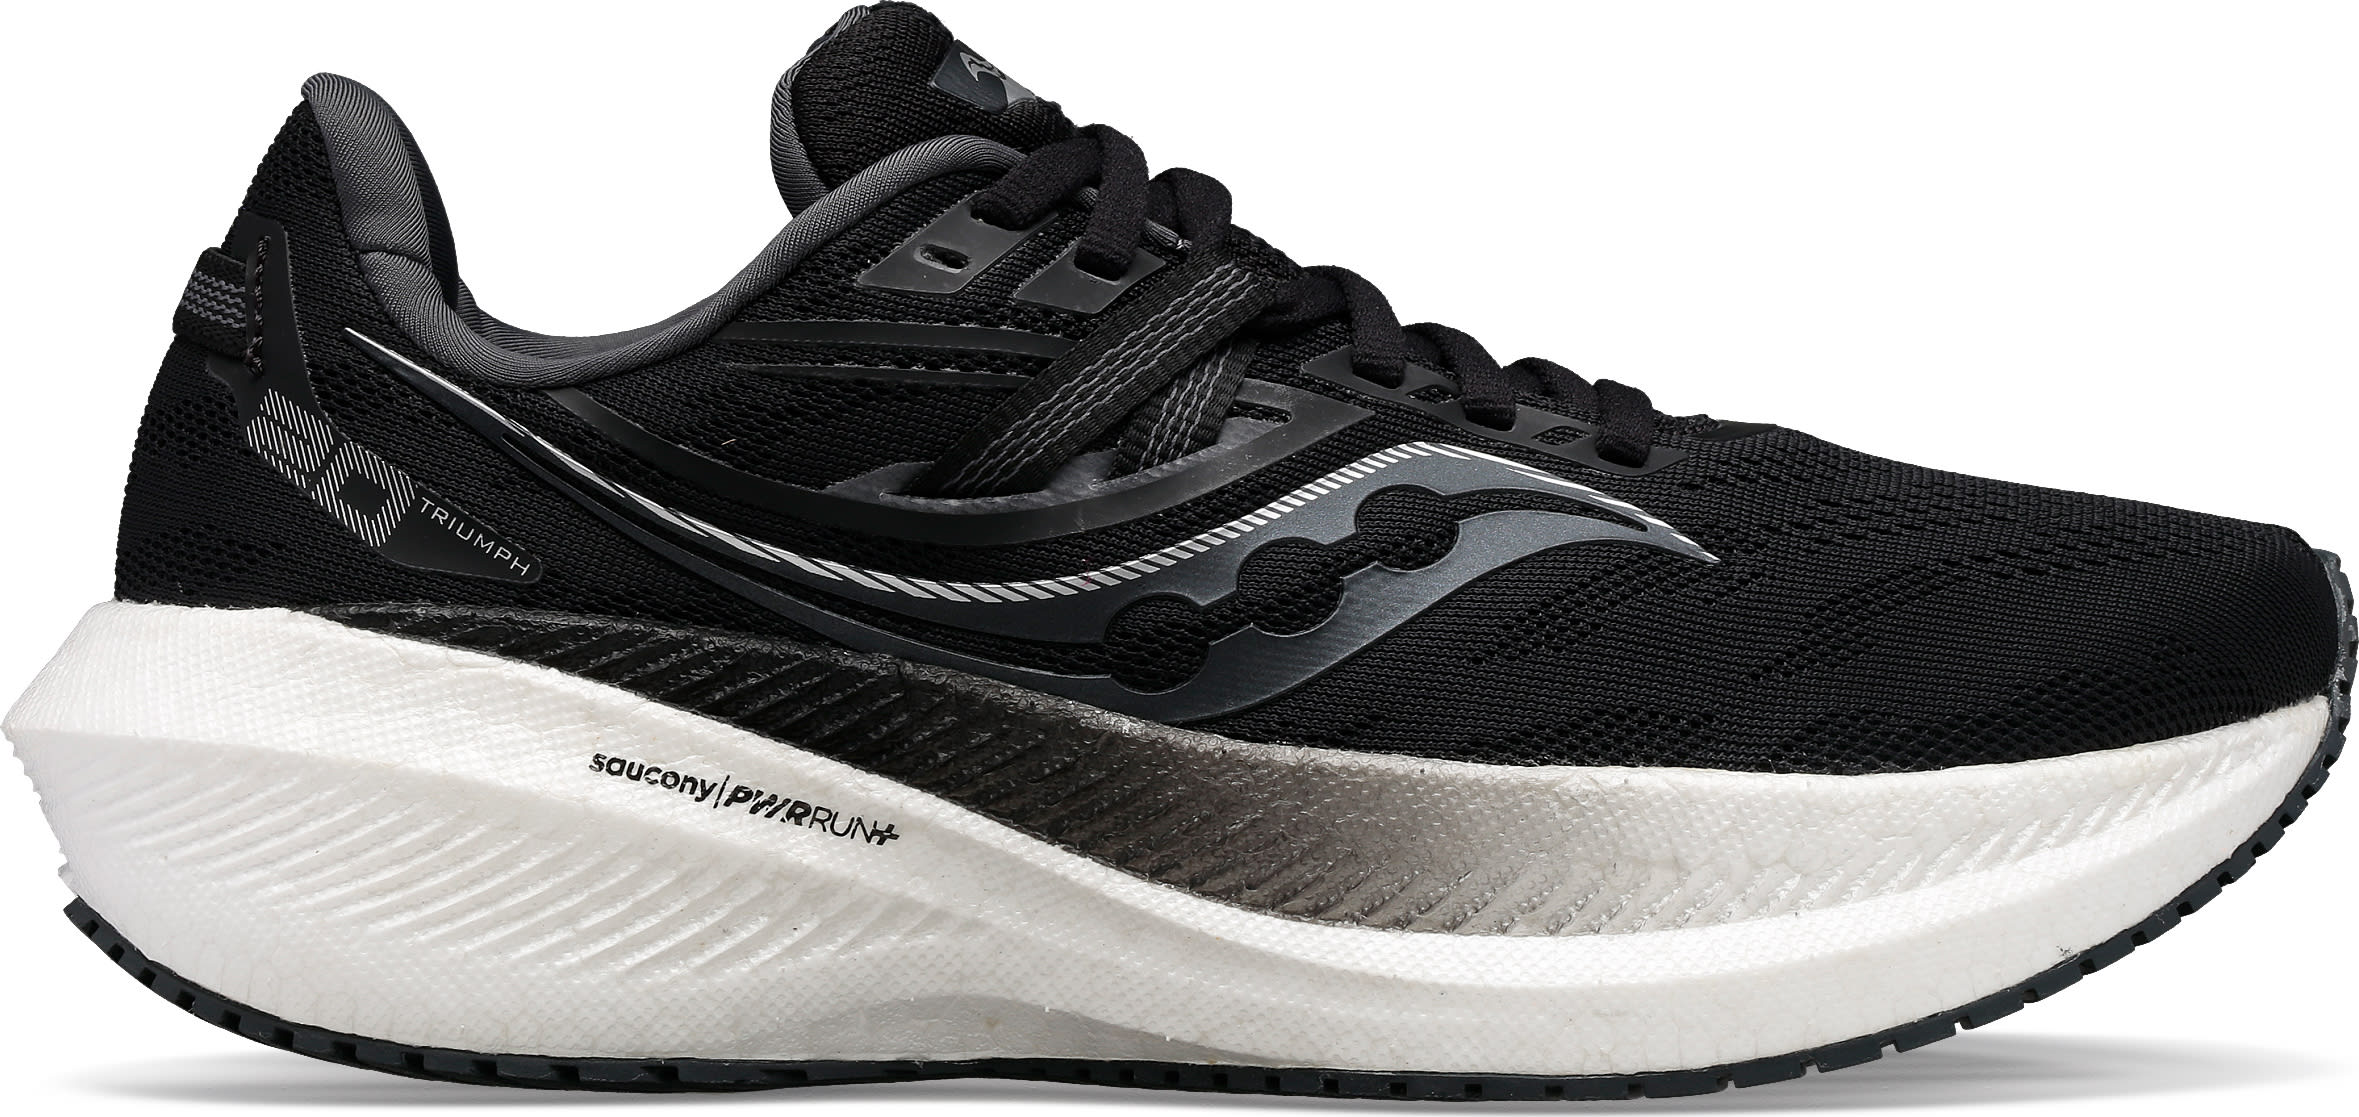 Buy Saucony Men's Triumph 20 Wide from Outnorth